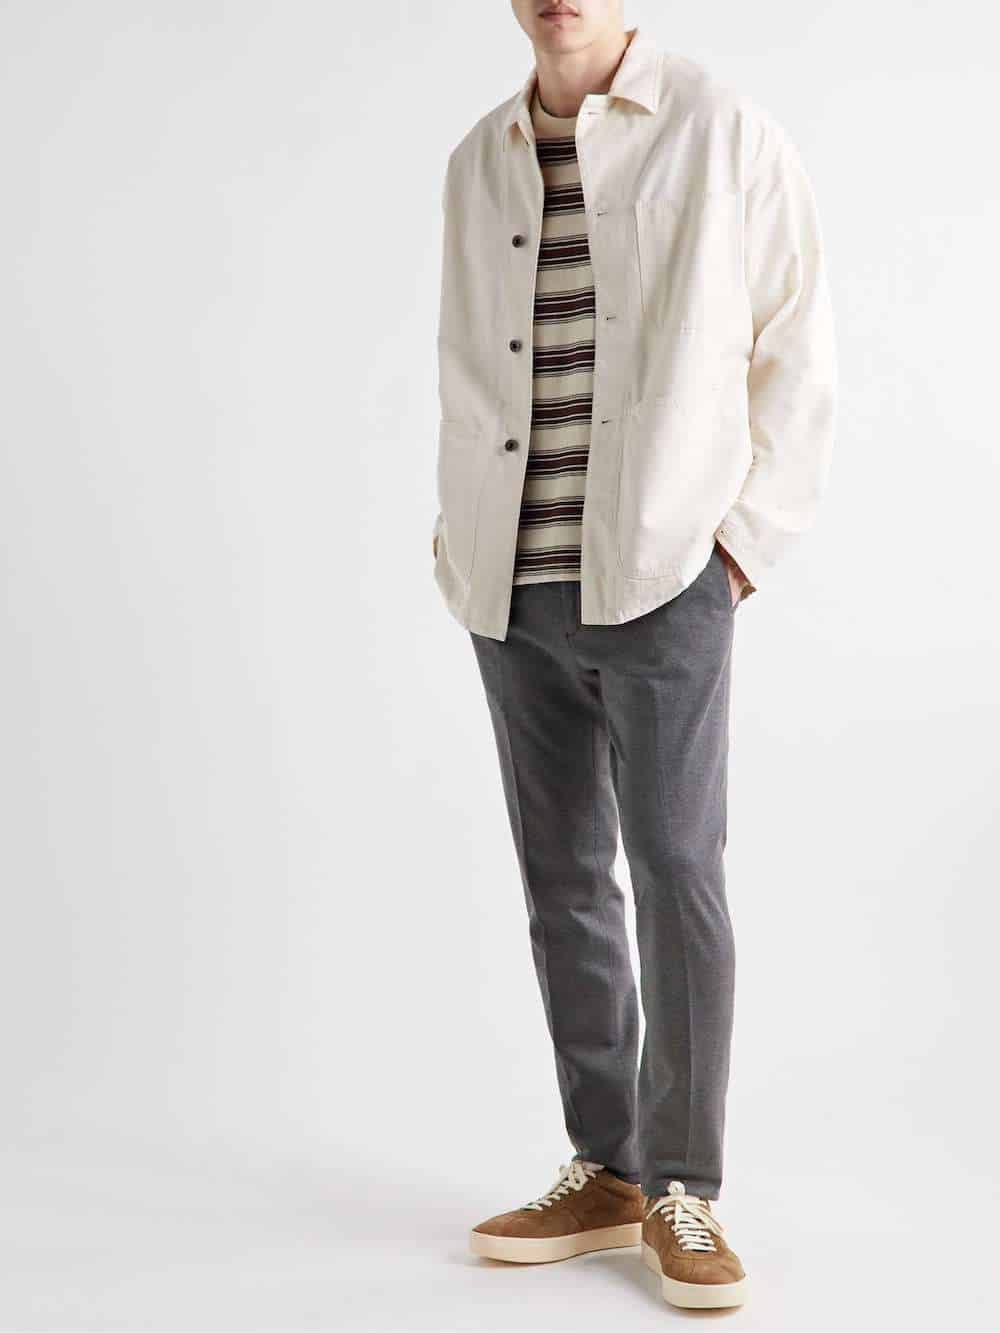 image of a man in grey pants, brown sneakers, a striped t-shirt, and ivory chore jacket